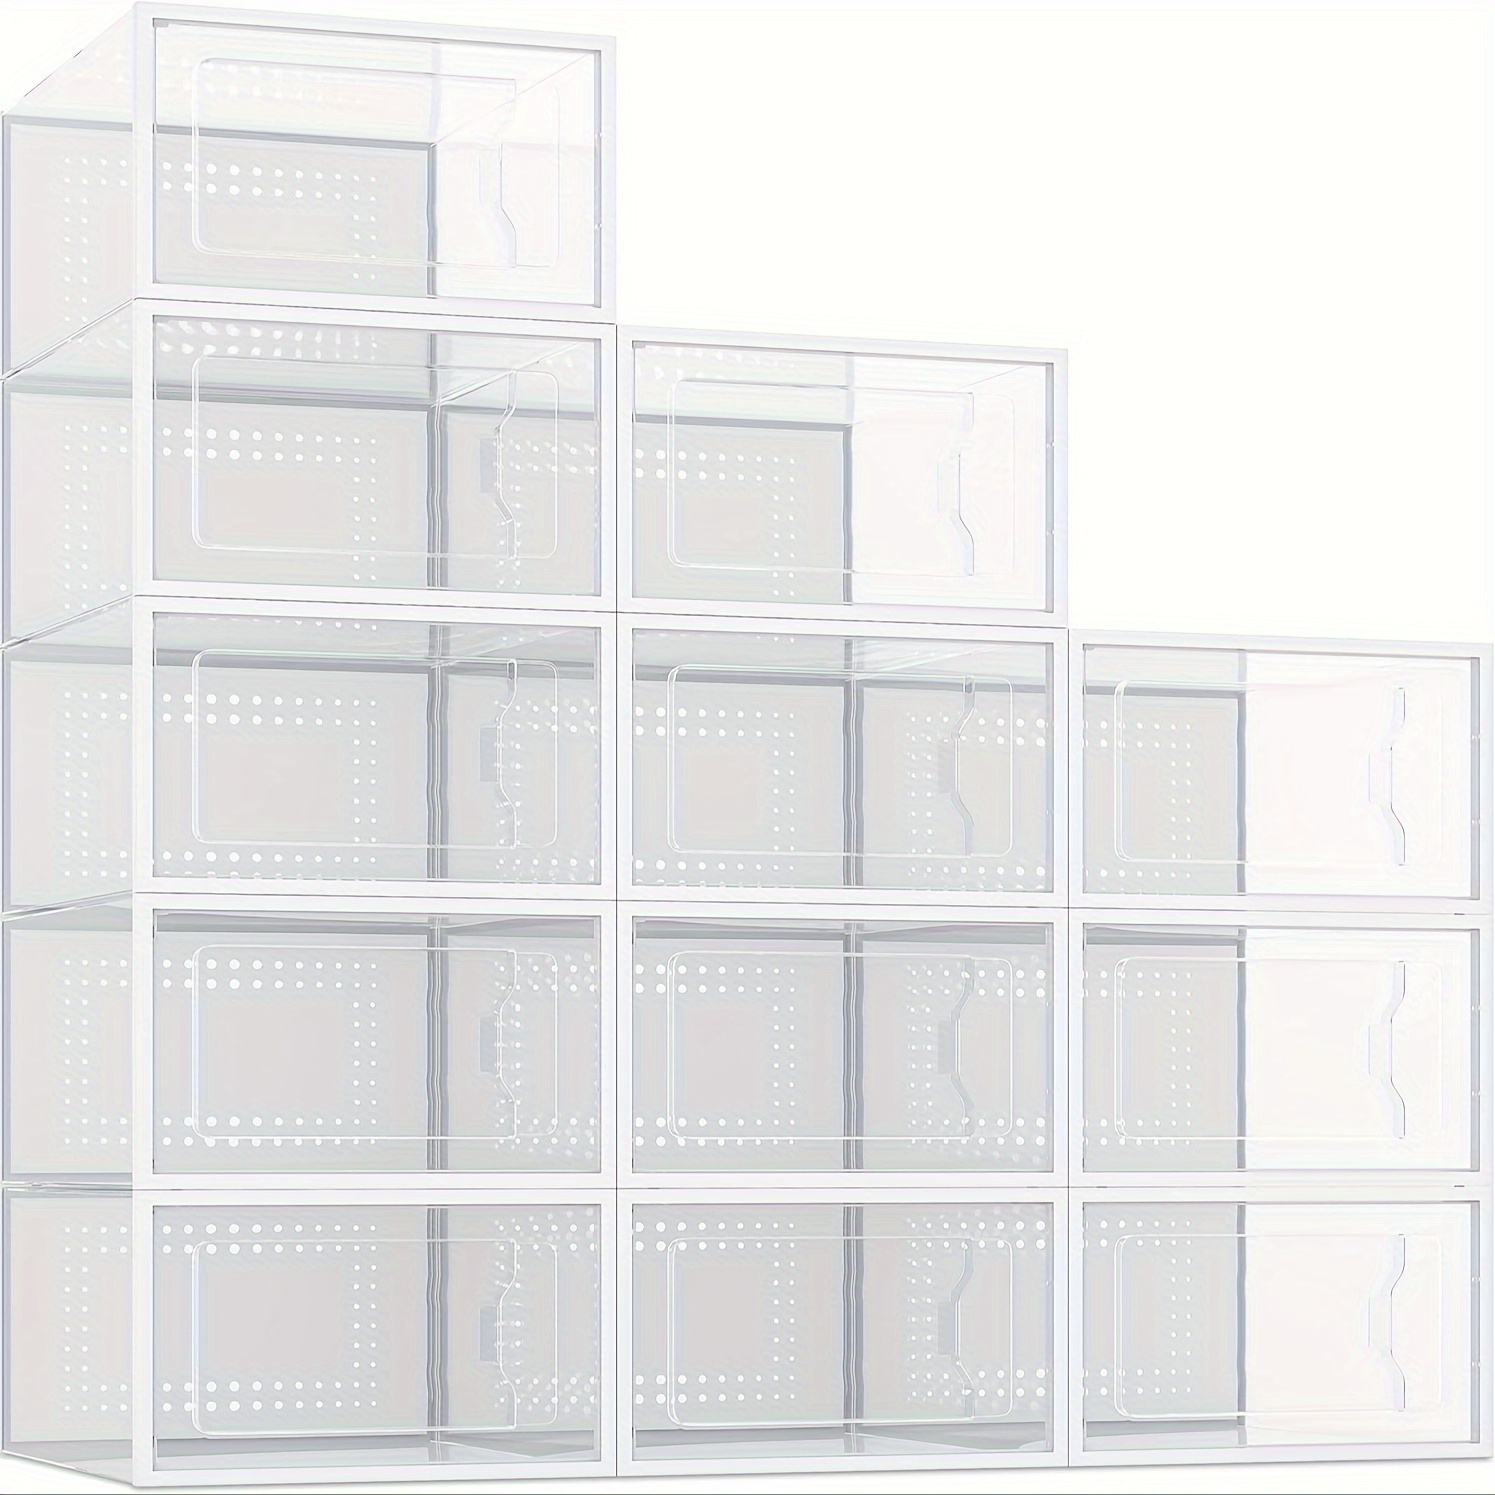 

12pcs Shoe Storage Box, Clear Plastic Stackable Shoe Organizer For Closet, Interlocking Design Shoe Container Bins For Sneakers, Foldable Shoe Rack With Lids